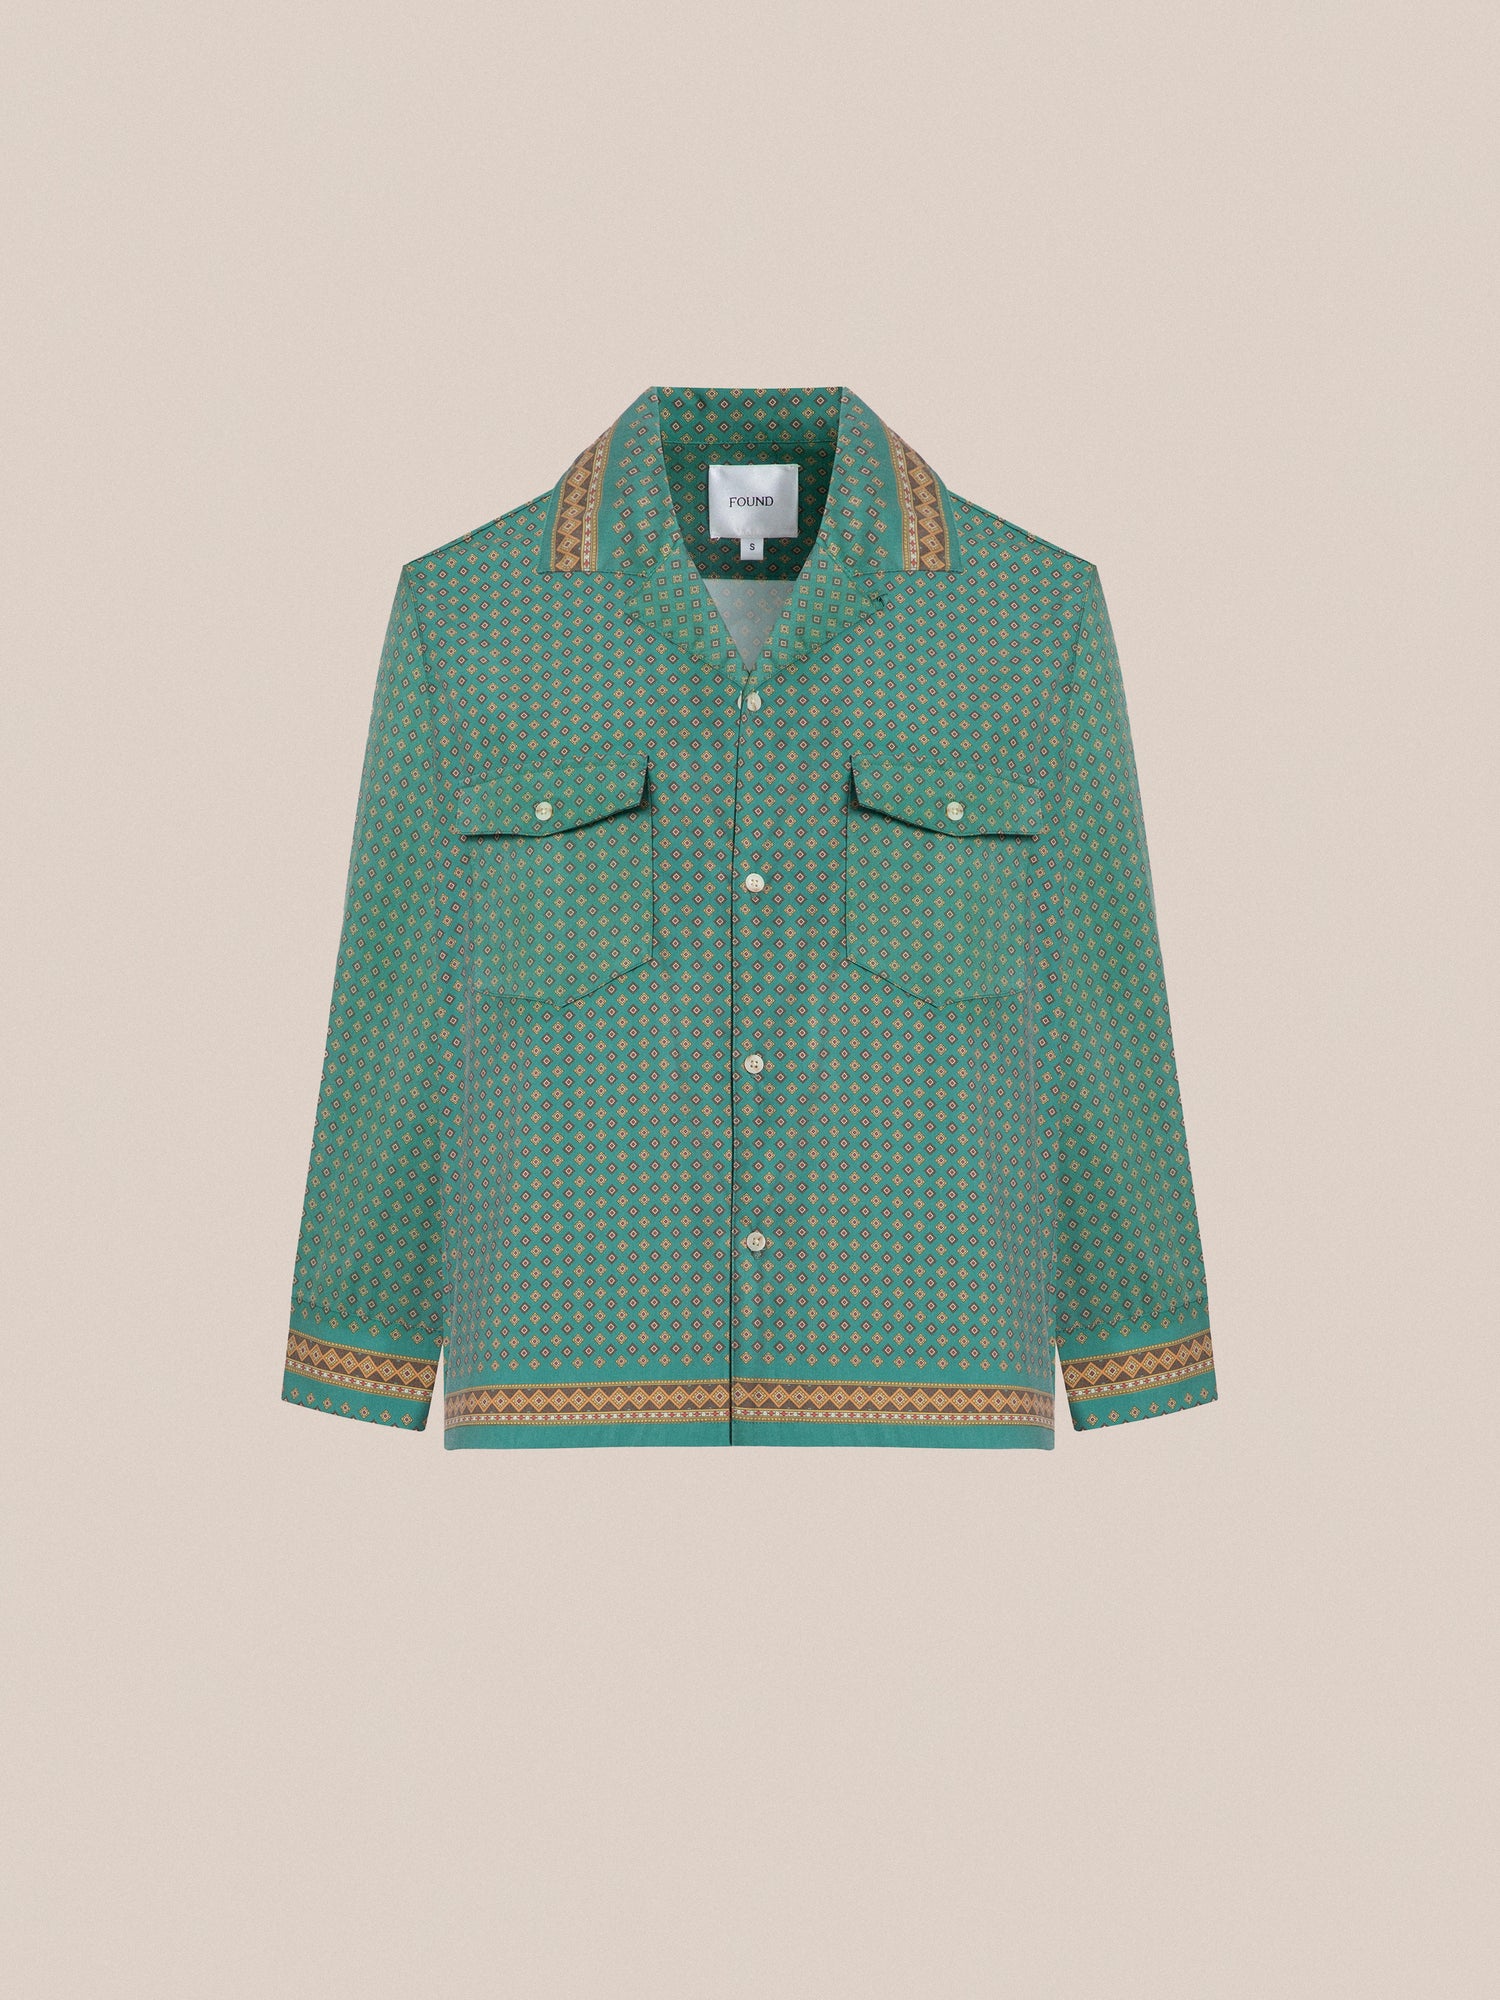 Found Arbor Long Sleeve Camp Shirt with double breast pockets and traditional Indo patterns - green.